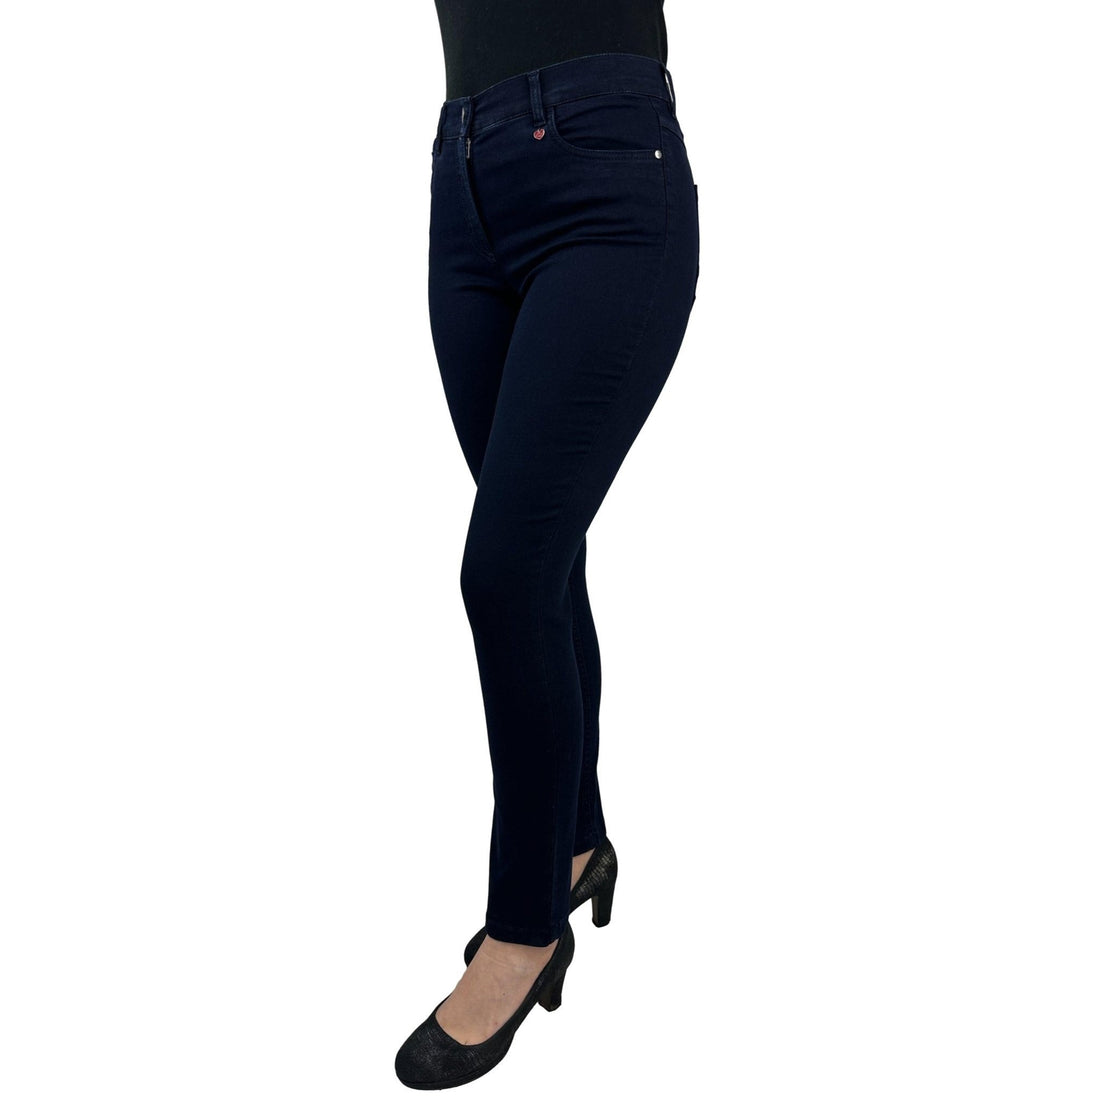 Relaxed by Toni Jeans My Style 12-02. Mode von Relaxed by Toni